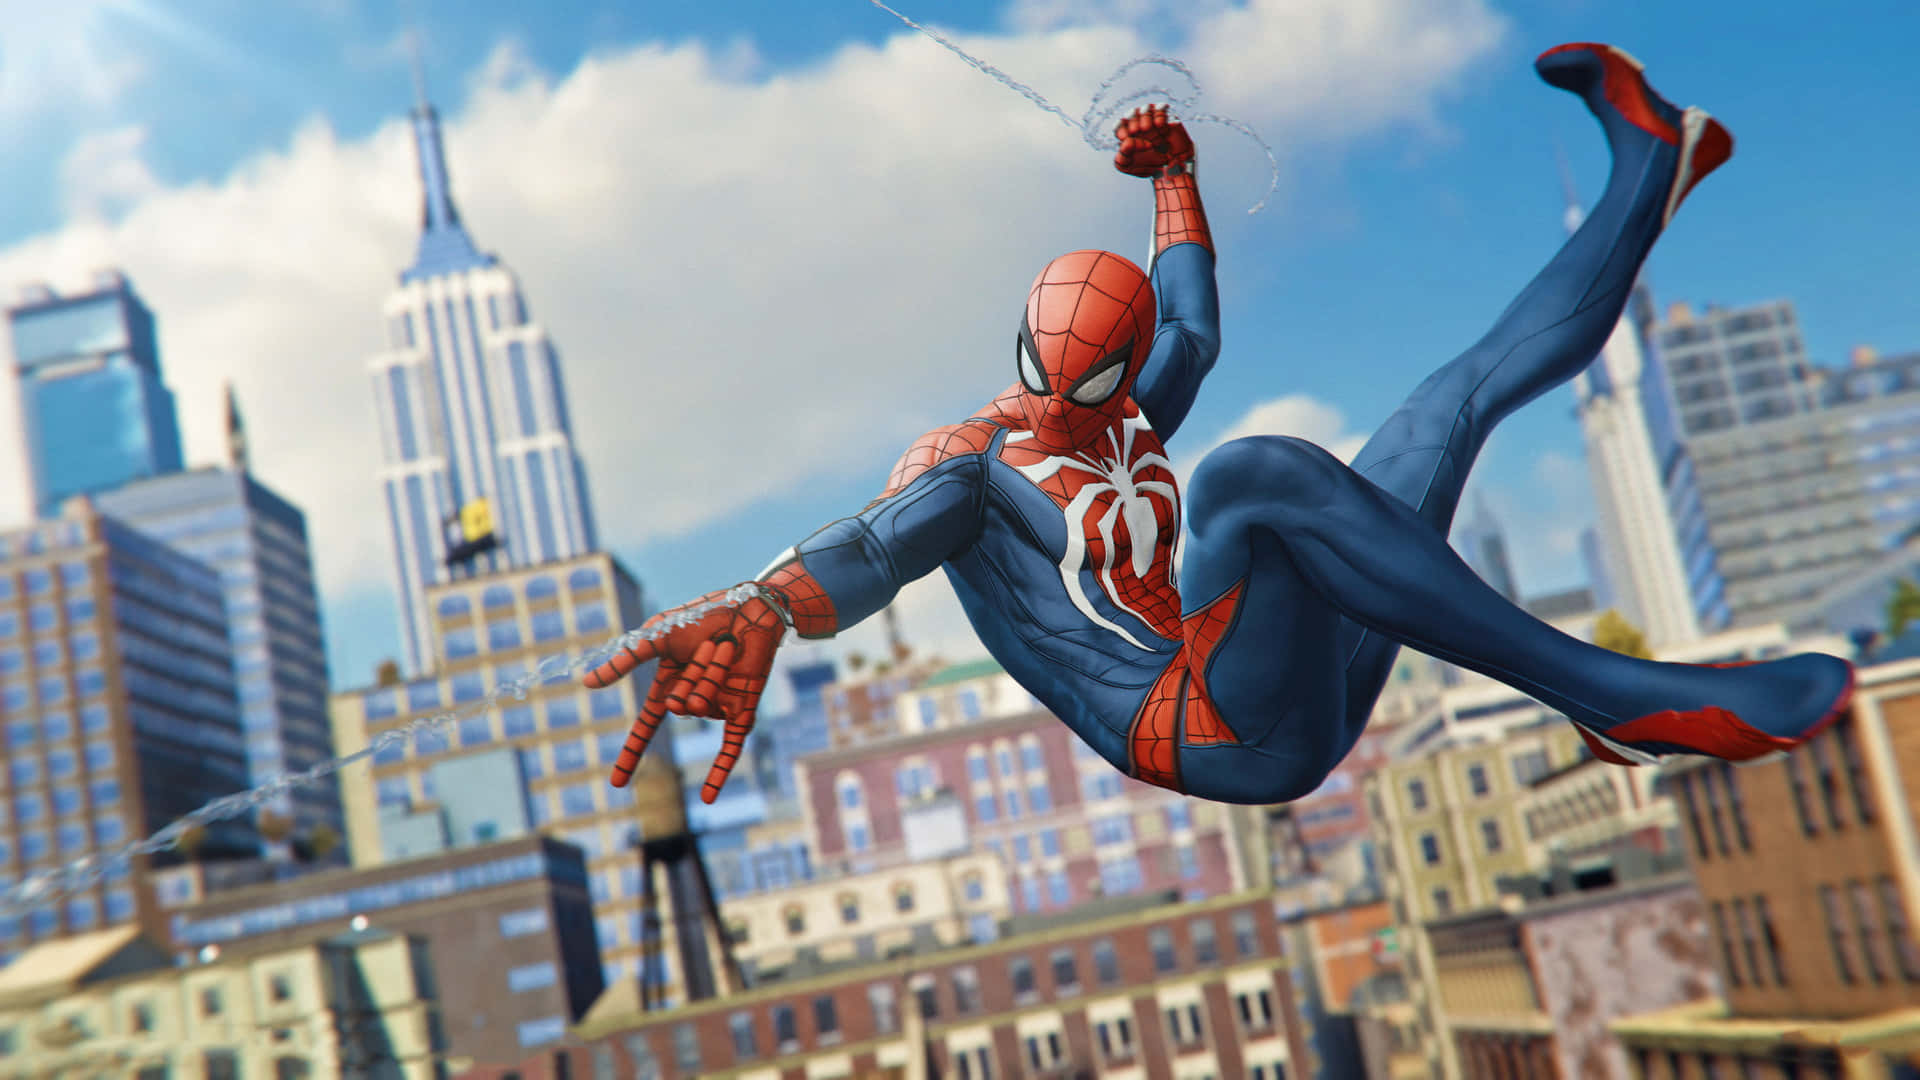 Spider-Man gracefully swings through the city Wallpaper